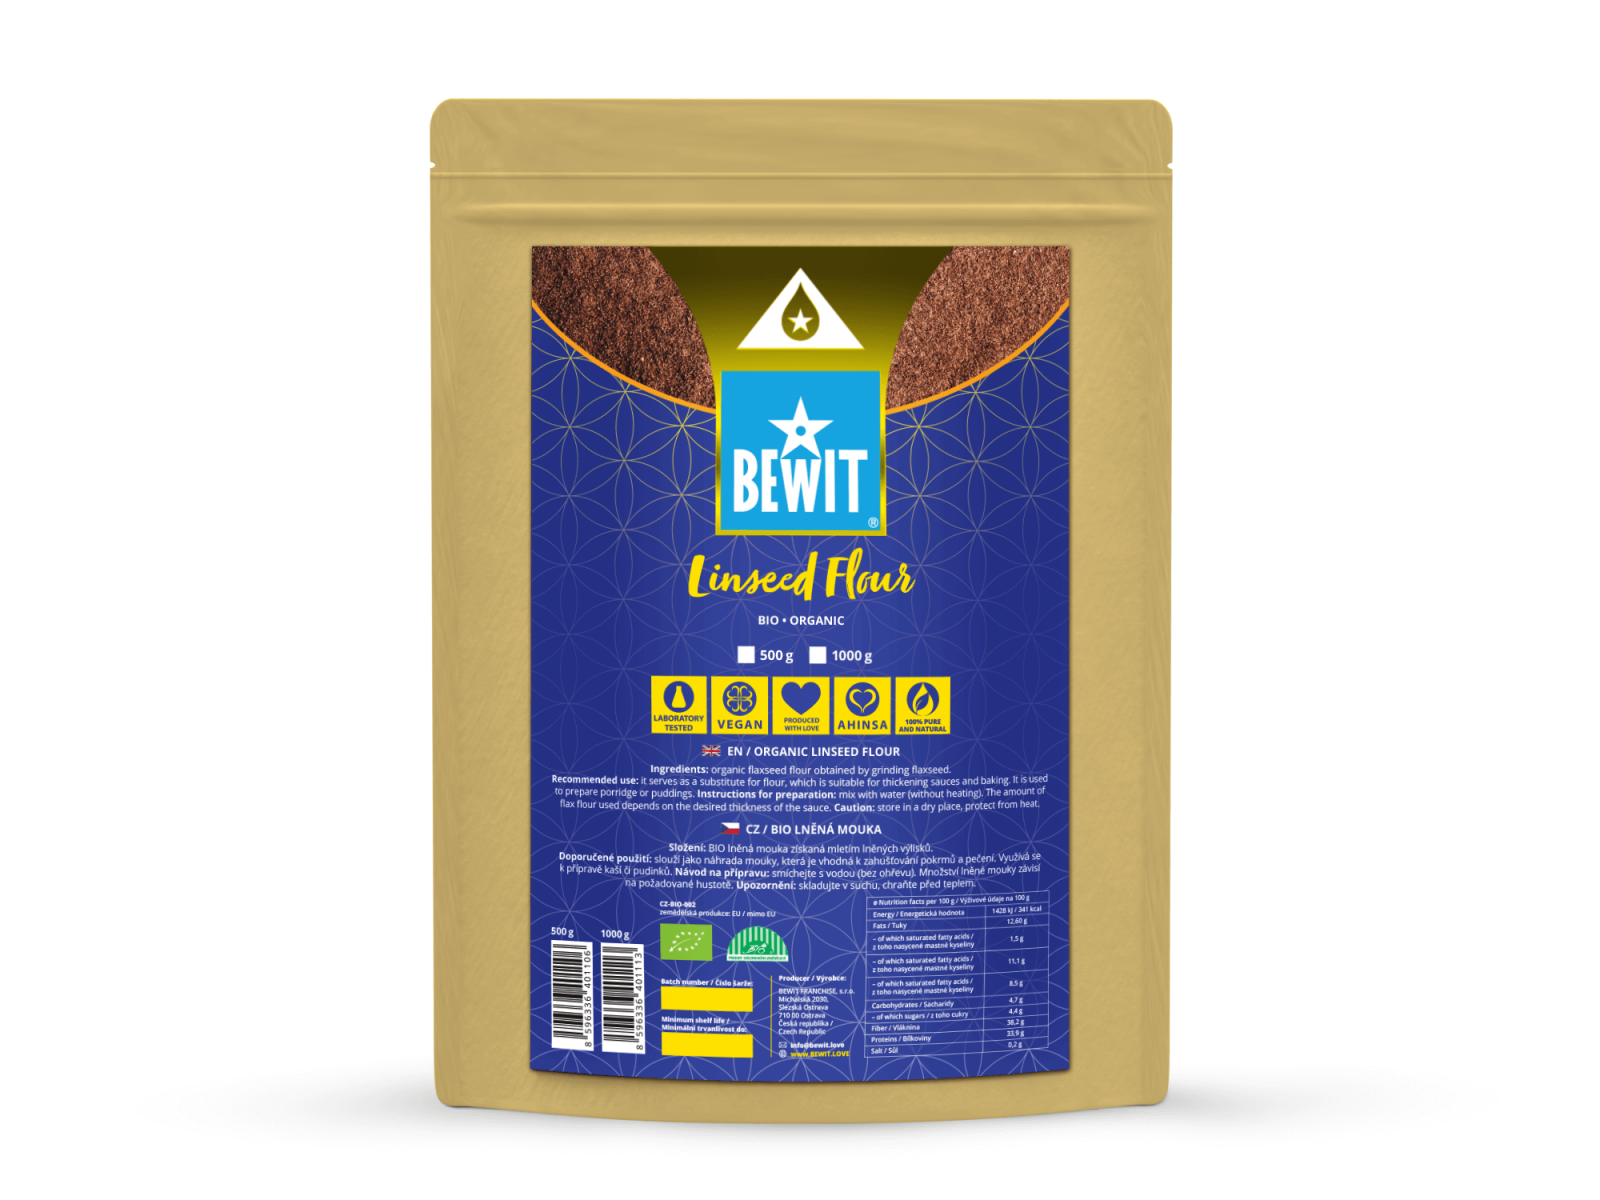 ORGANIC LINSEED FLOUR - Organic linseed flour obtained by grinding linseed. - 2